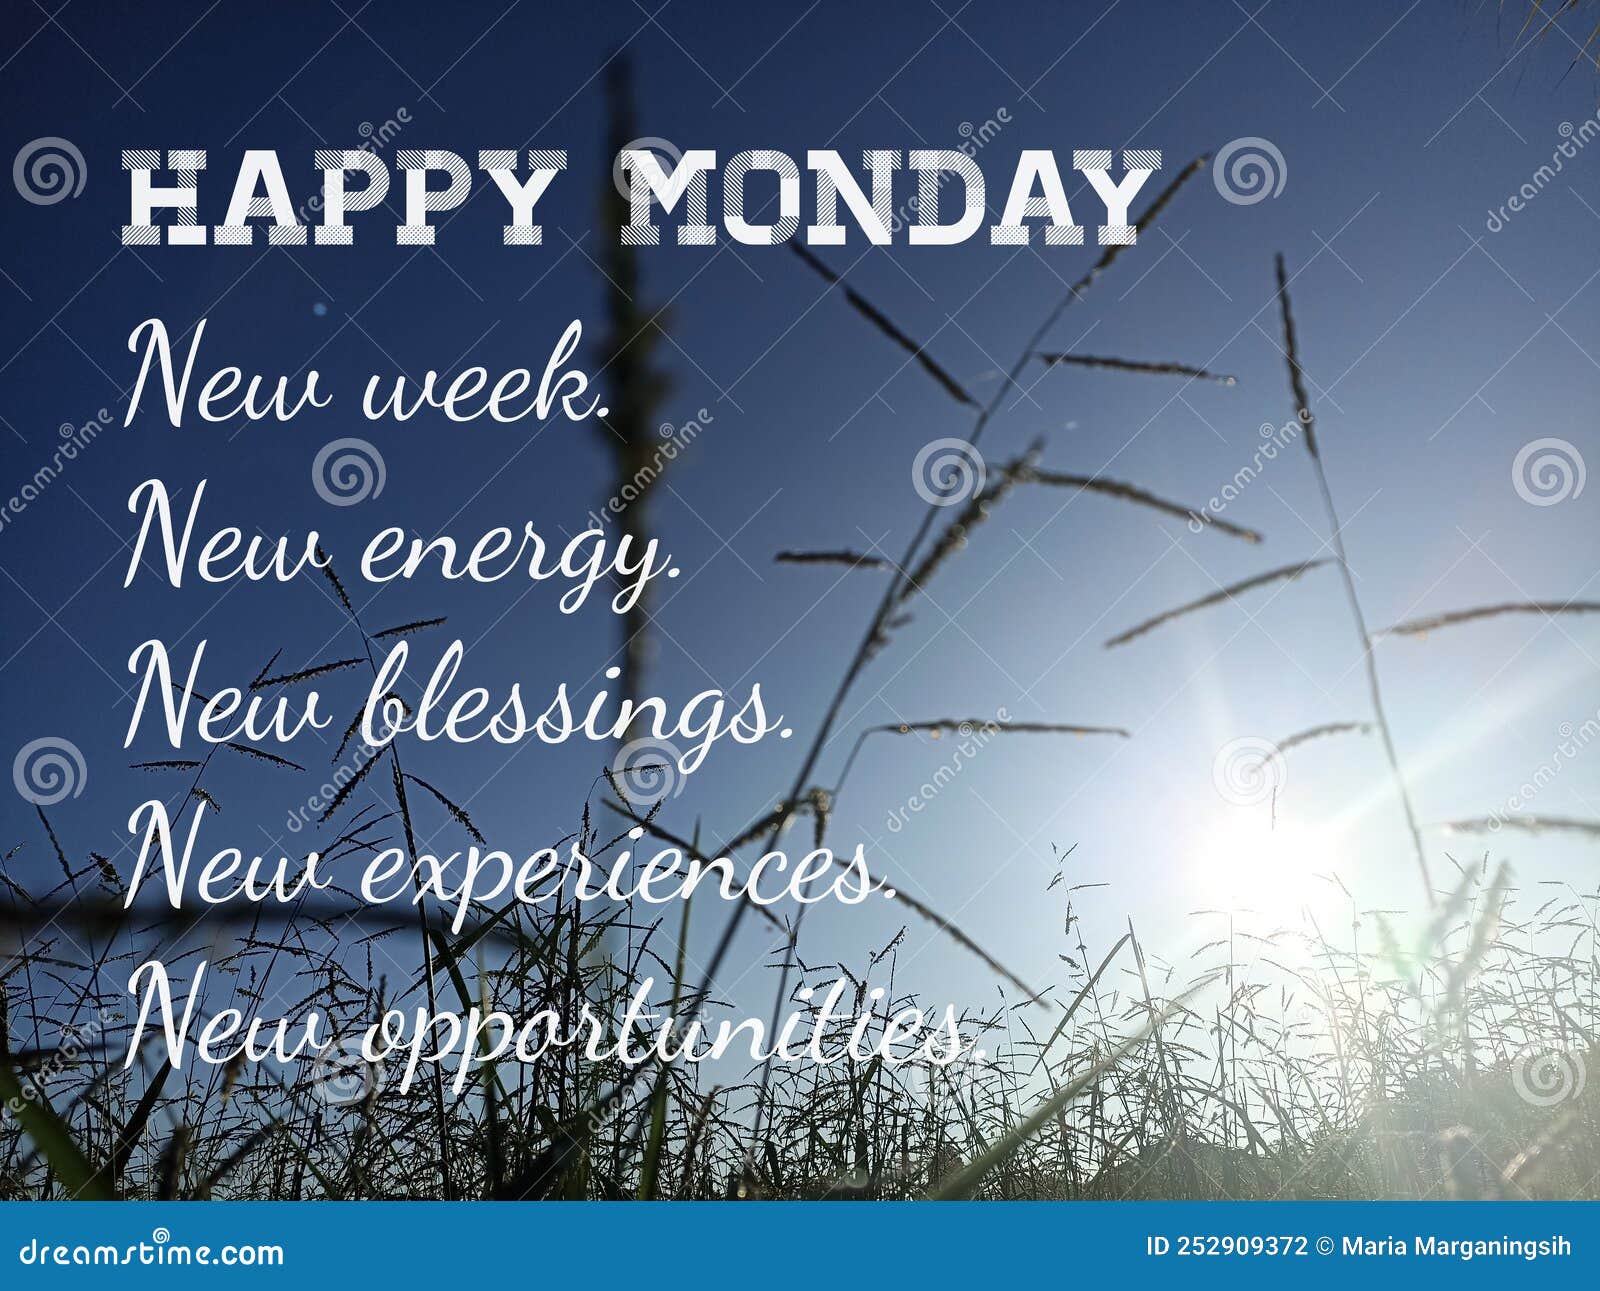 Monday Inspirational Motivational Words - Hello Monday. Let's Keep ...